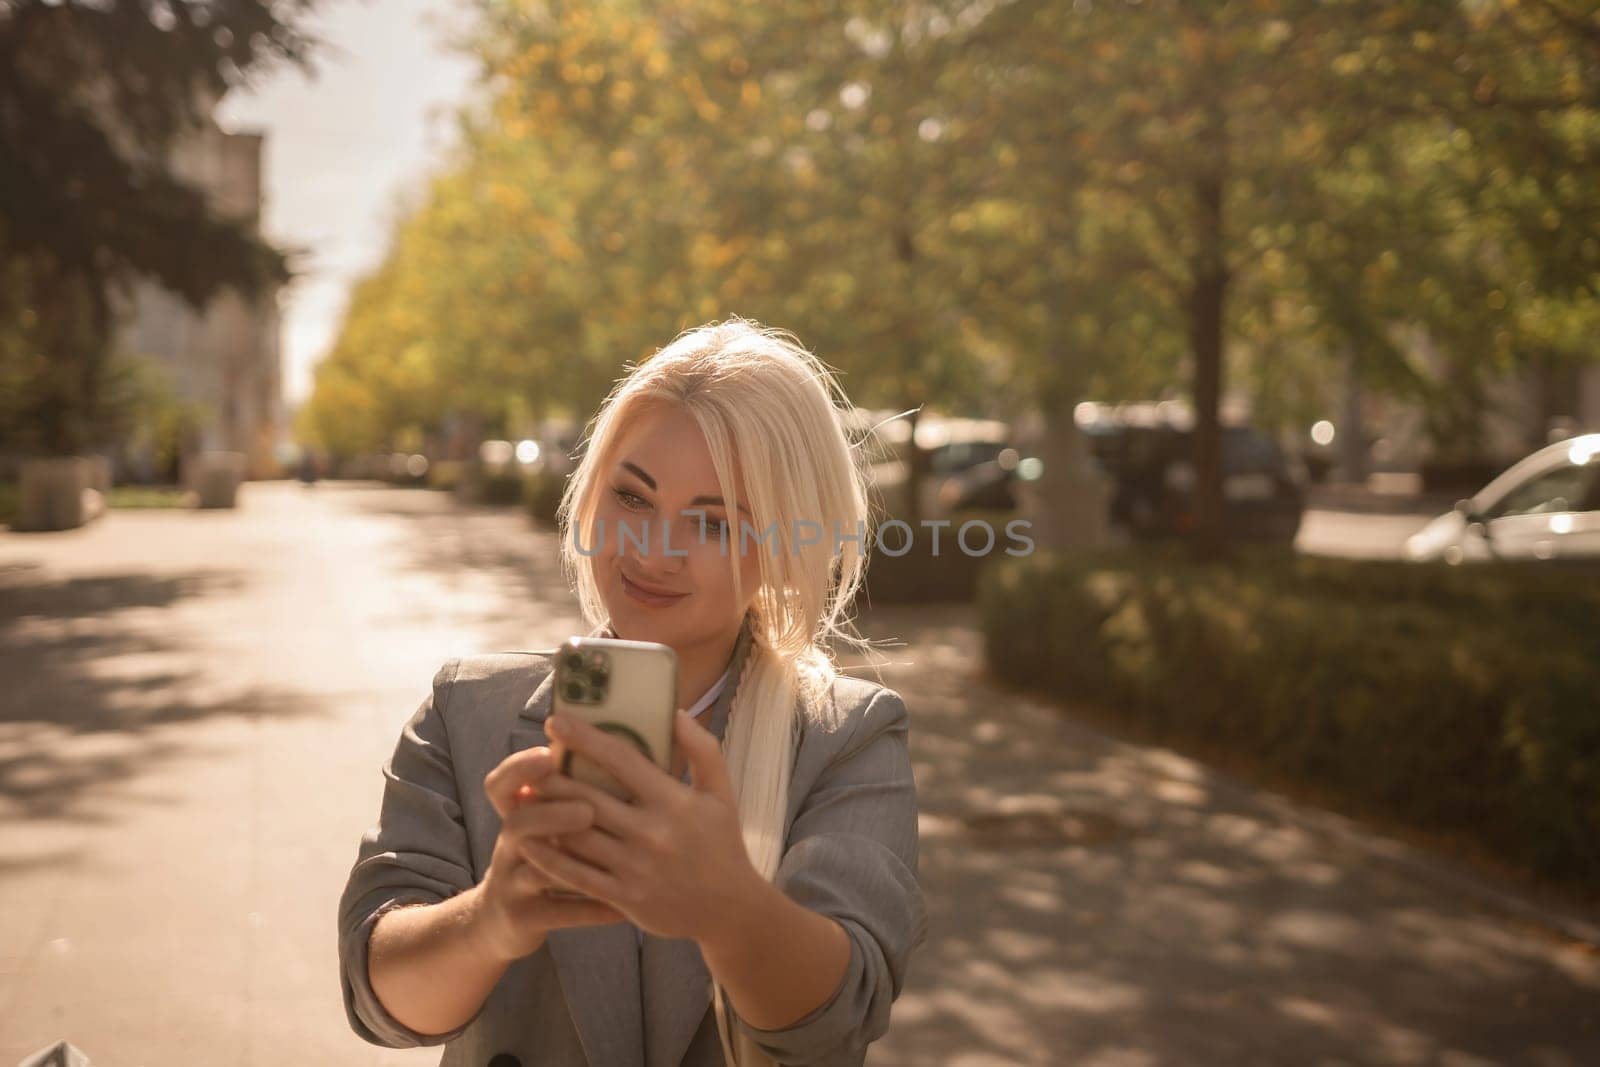 A woman is taking a picture of herself with her cell phone. She is wearing a gray jacket and scarf. The scene is set in a city with trees and cars in the background. by Matiunina